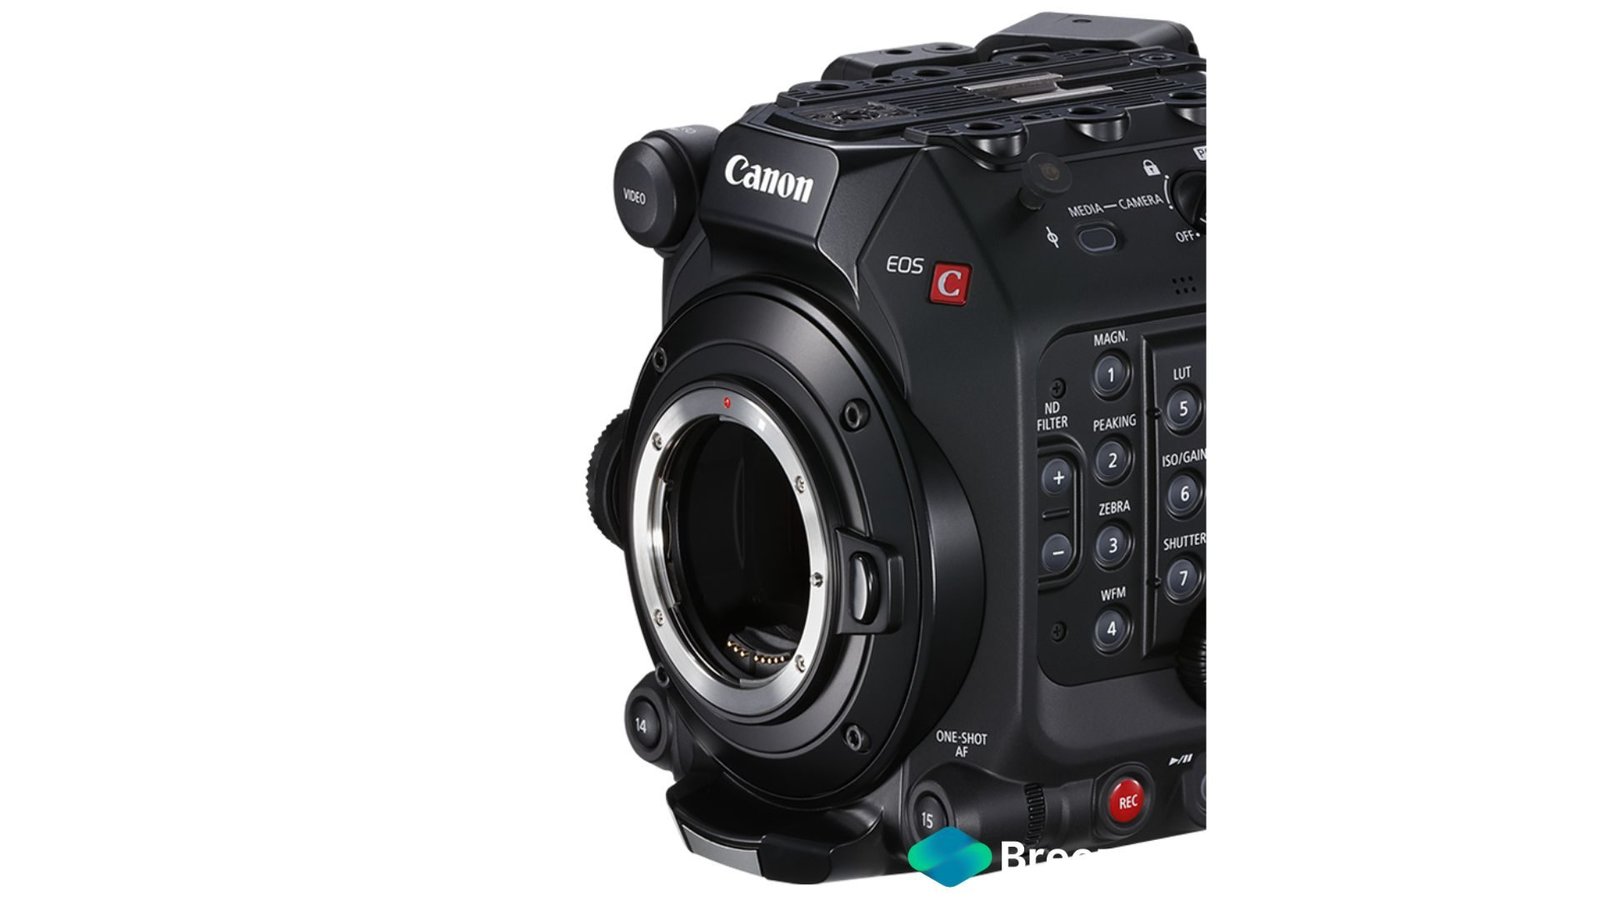 Rent Canon C-300 Mark III Camera with Canon Lens Kit in Delhi NCR, Rent Canon EOS R-5 Mirror Less 8K Camera with Cp.2 Lens Kit in Delhi NCR, Camera accessories, Camera lenses for rent, in Delhi Gurgaon Noida, hire Shooting equipment, Lighting equipment rental, Film gear rental for Video production, camera rental company in Delhi, film equipment rental company